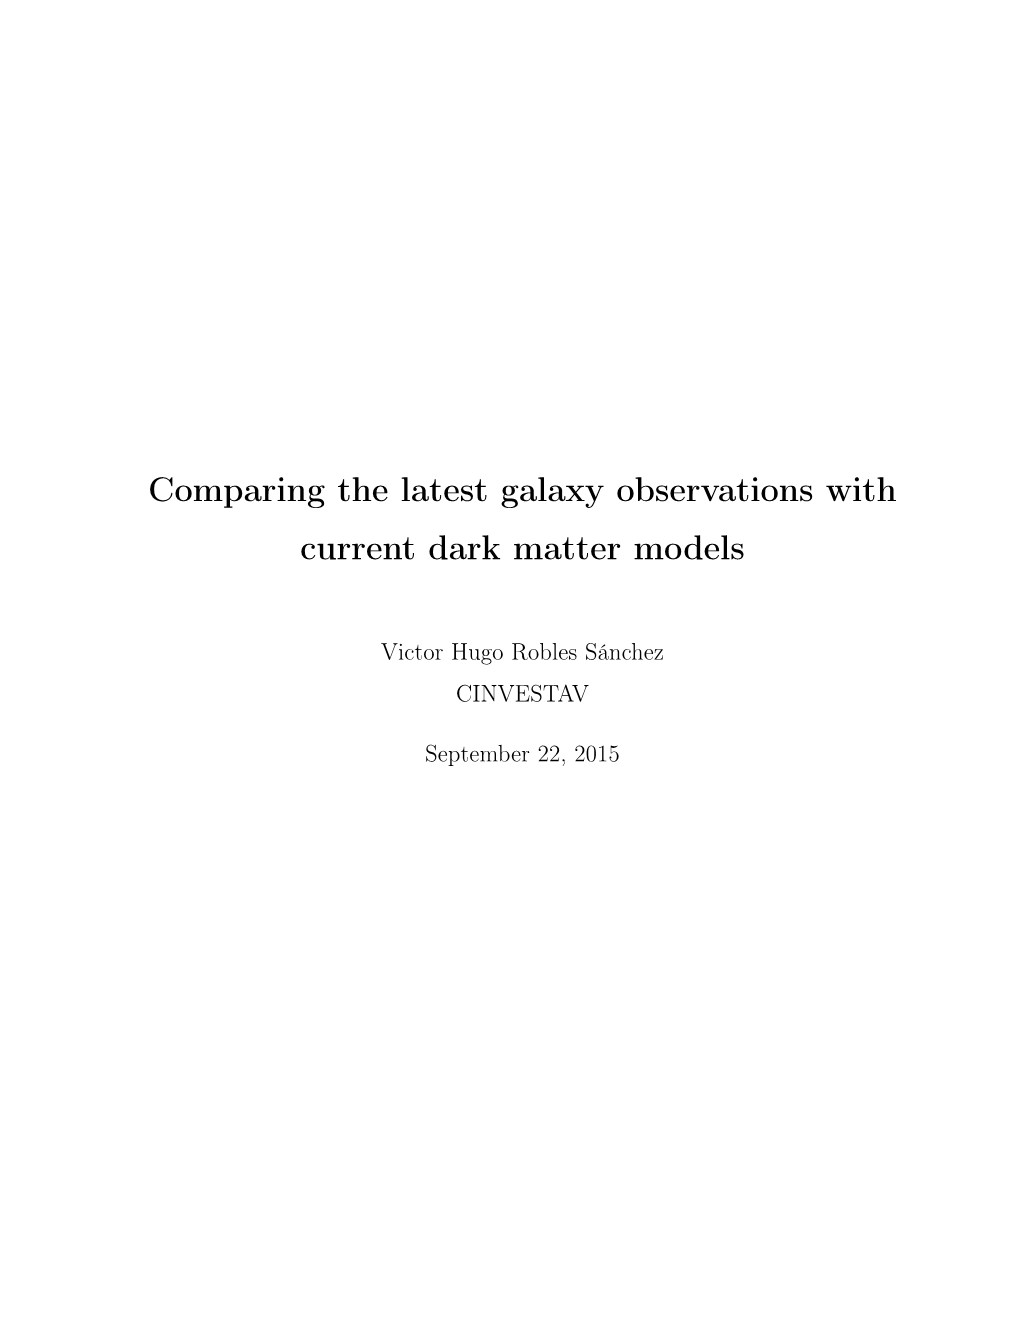 Comparing the Latest Galaxy Observations with Current Dark Matter Models